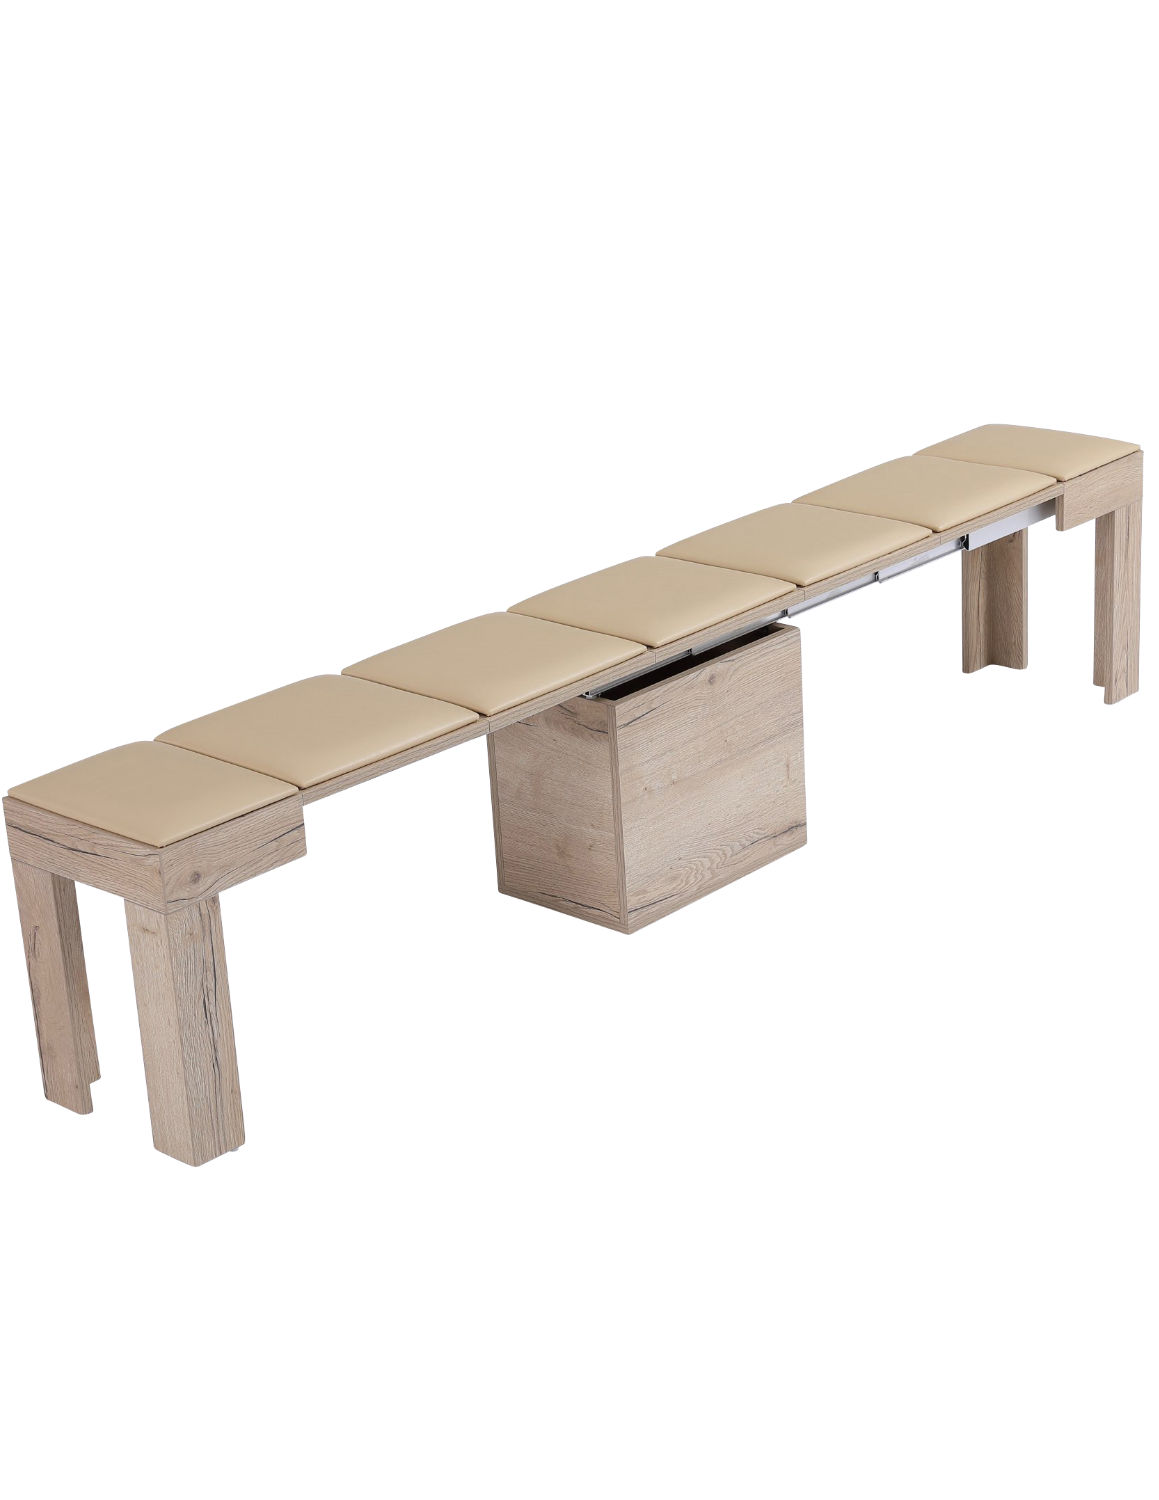 Mini Scatola - Expanding Bench Seats 5 Expand Furniture - Folding Tables, Smarter Wall Beds, Space Savers